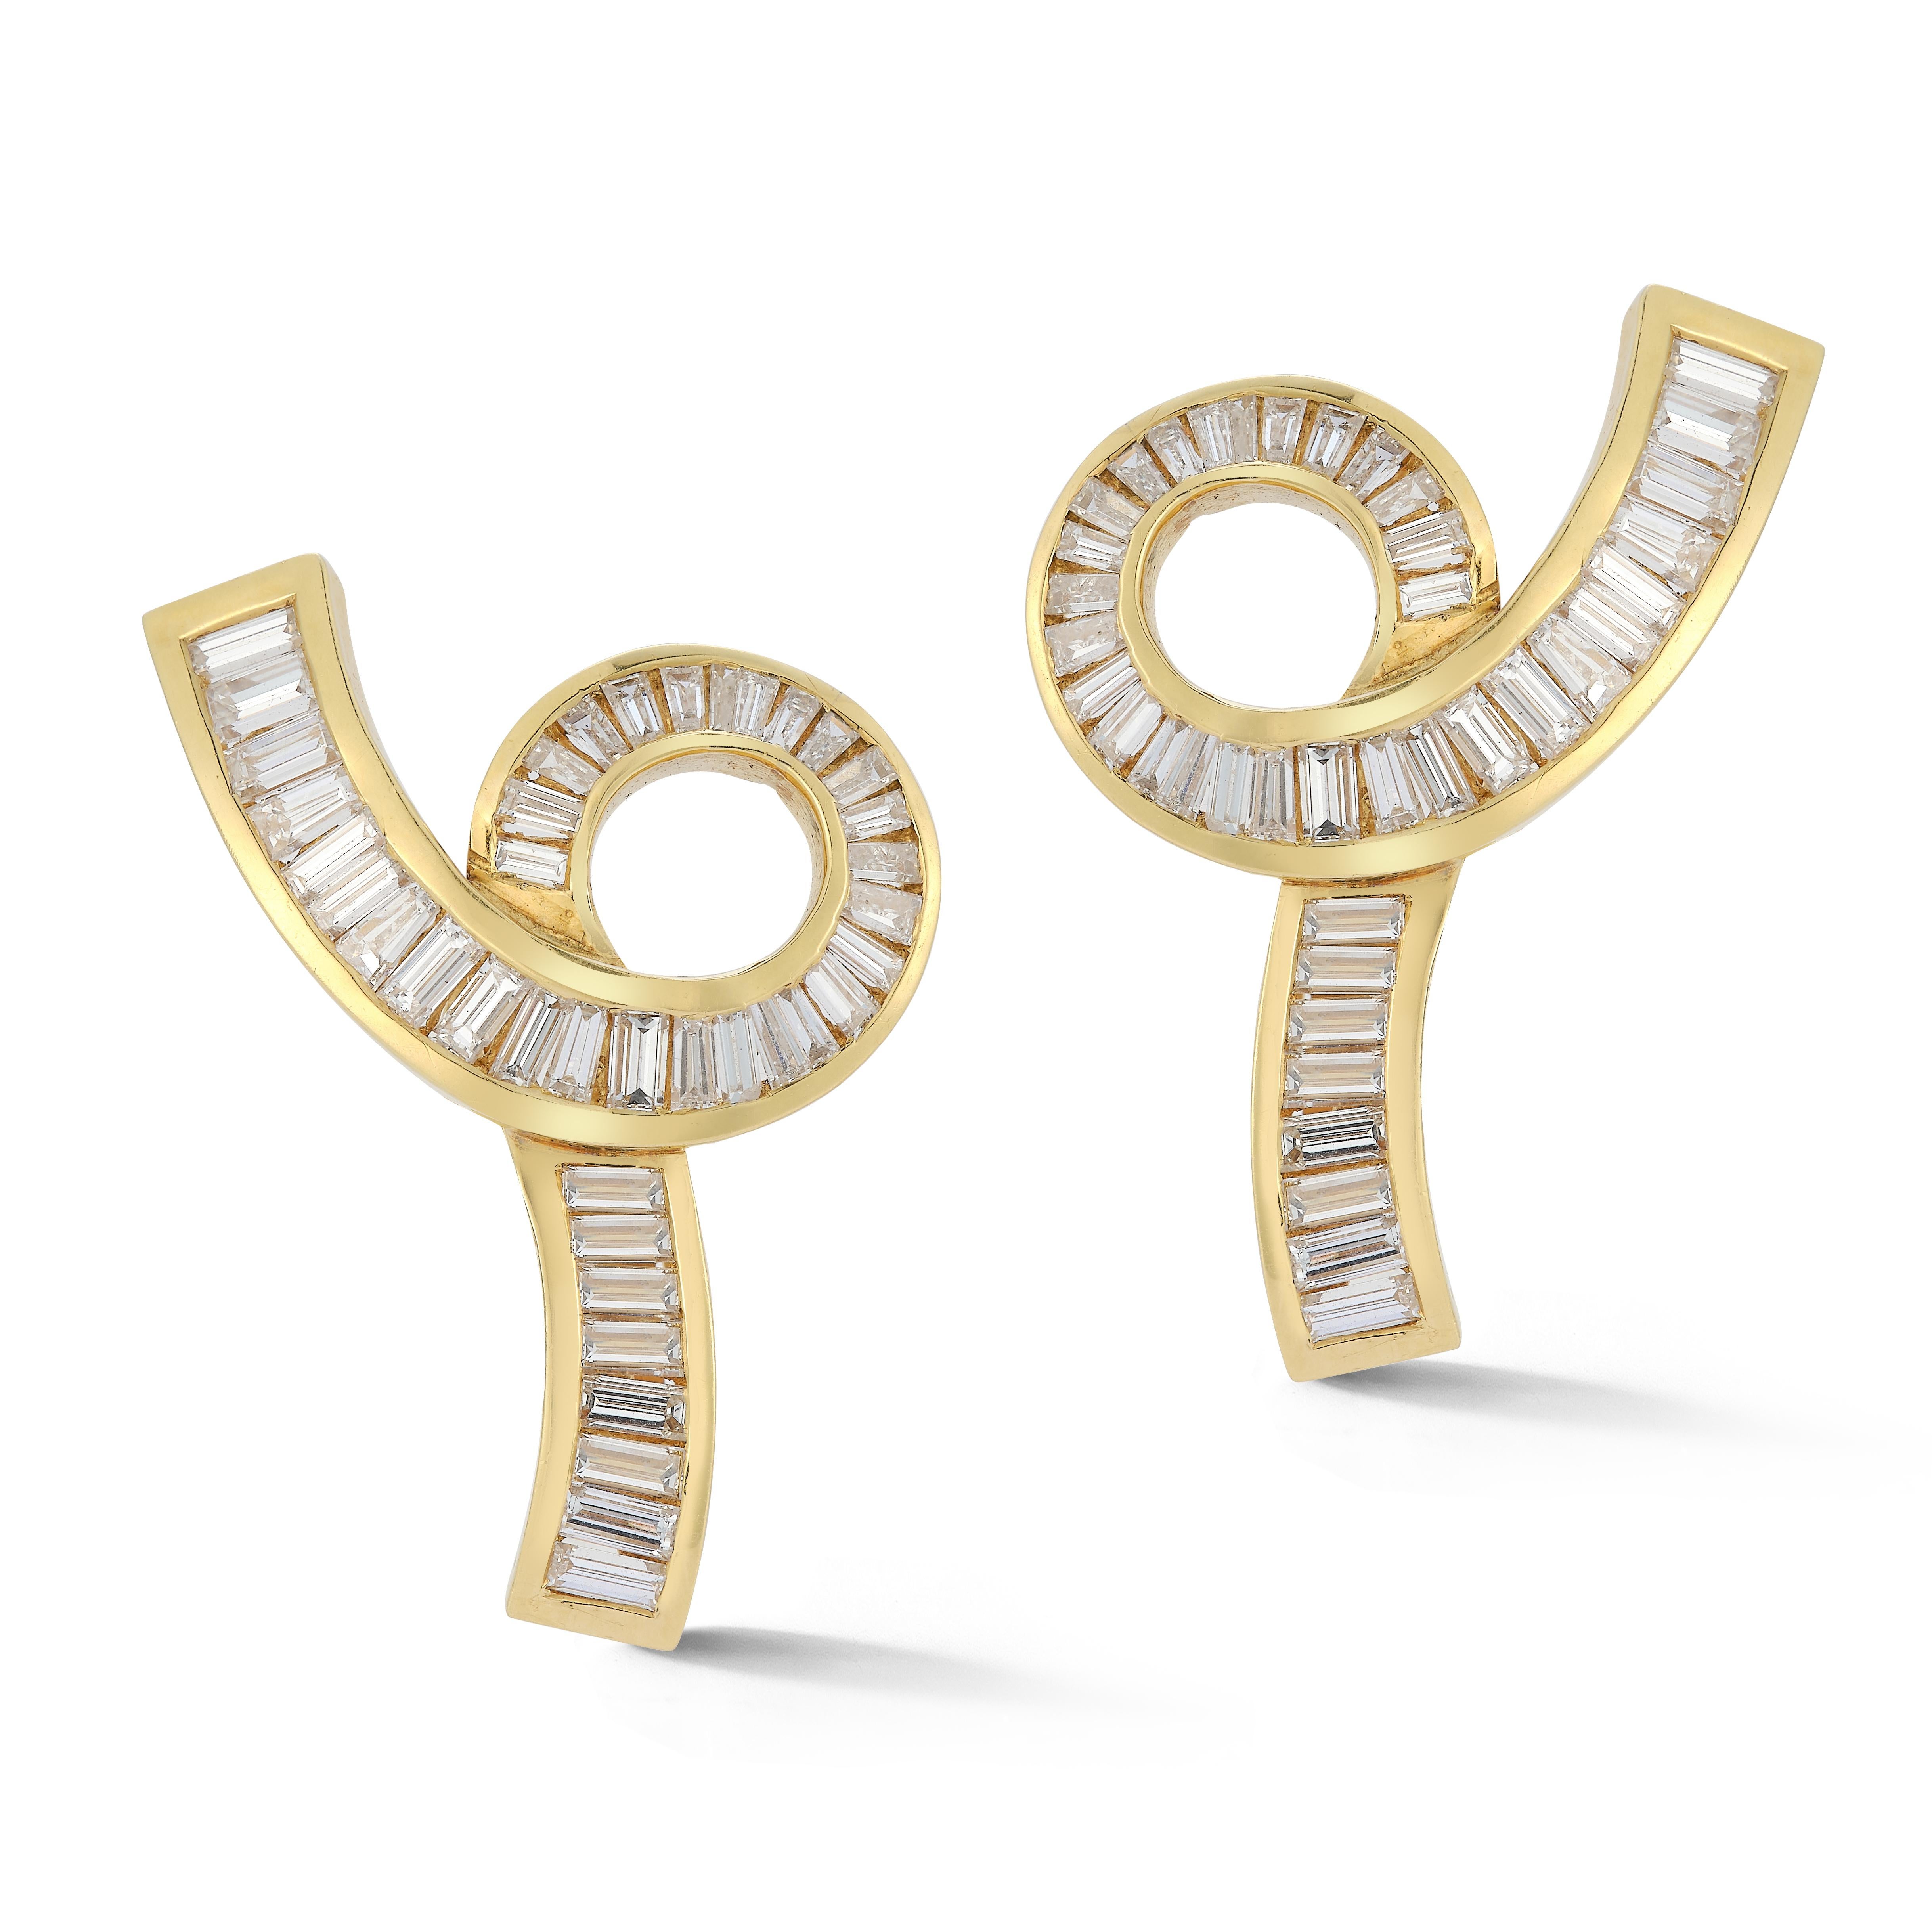 Diamond Swirl Earrings

 18 karat yellow gold swirl clip on earrings with 80 baguette diamonds with a total approximate weight of 6.90ct
